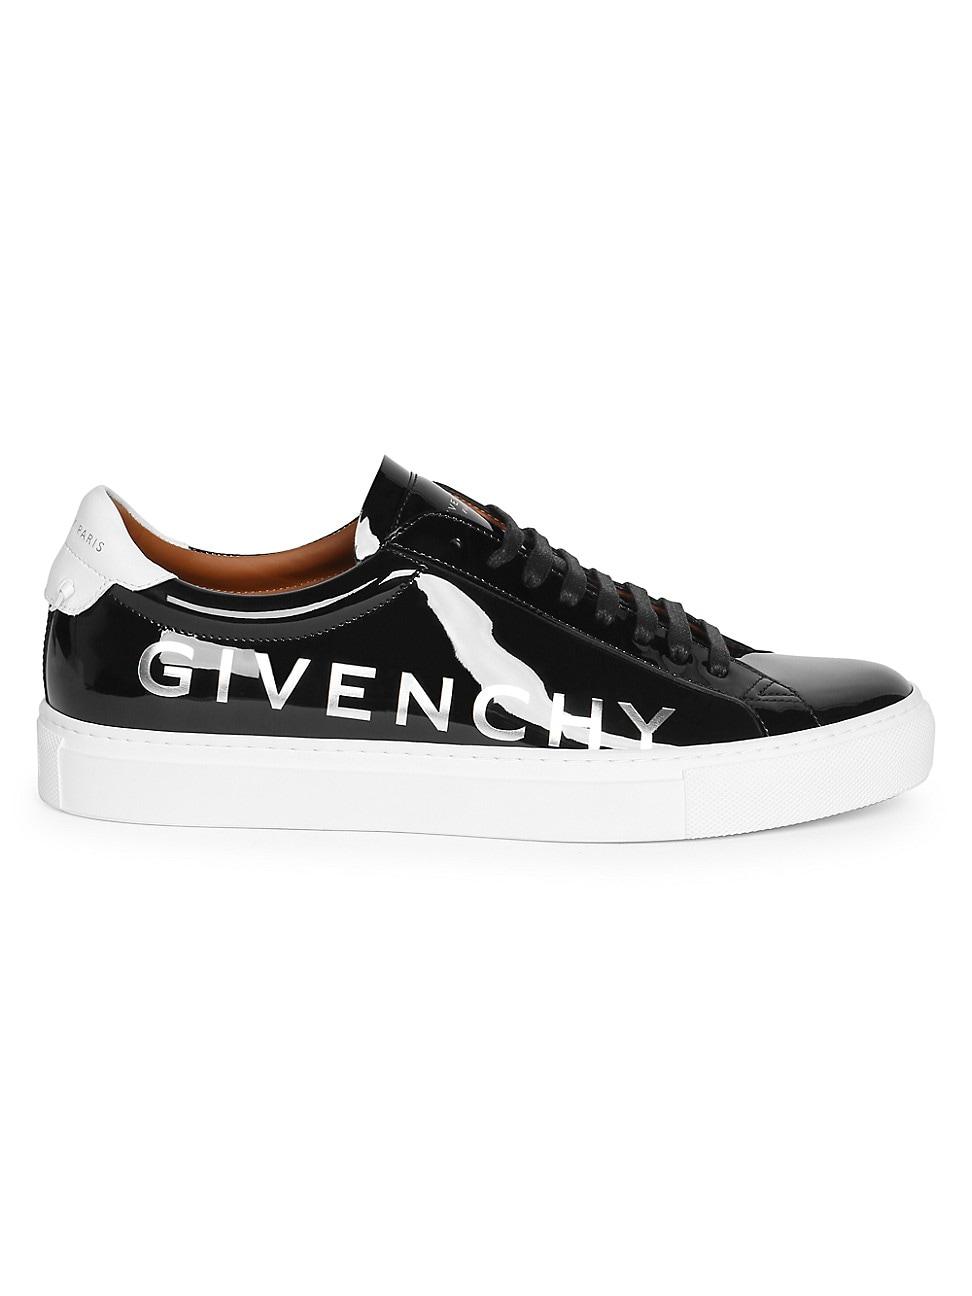 Givenchy Urban Street Patent Leather Sneakers in Black for Men | Lyst